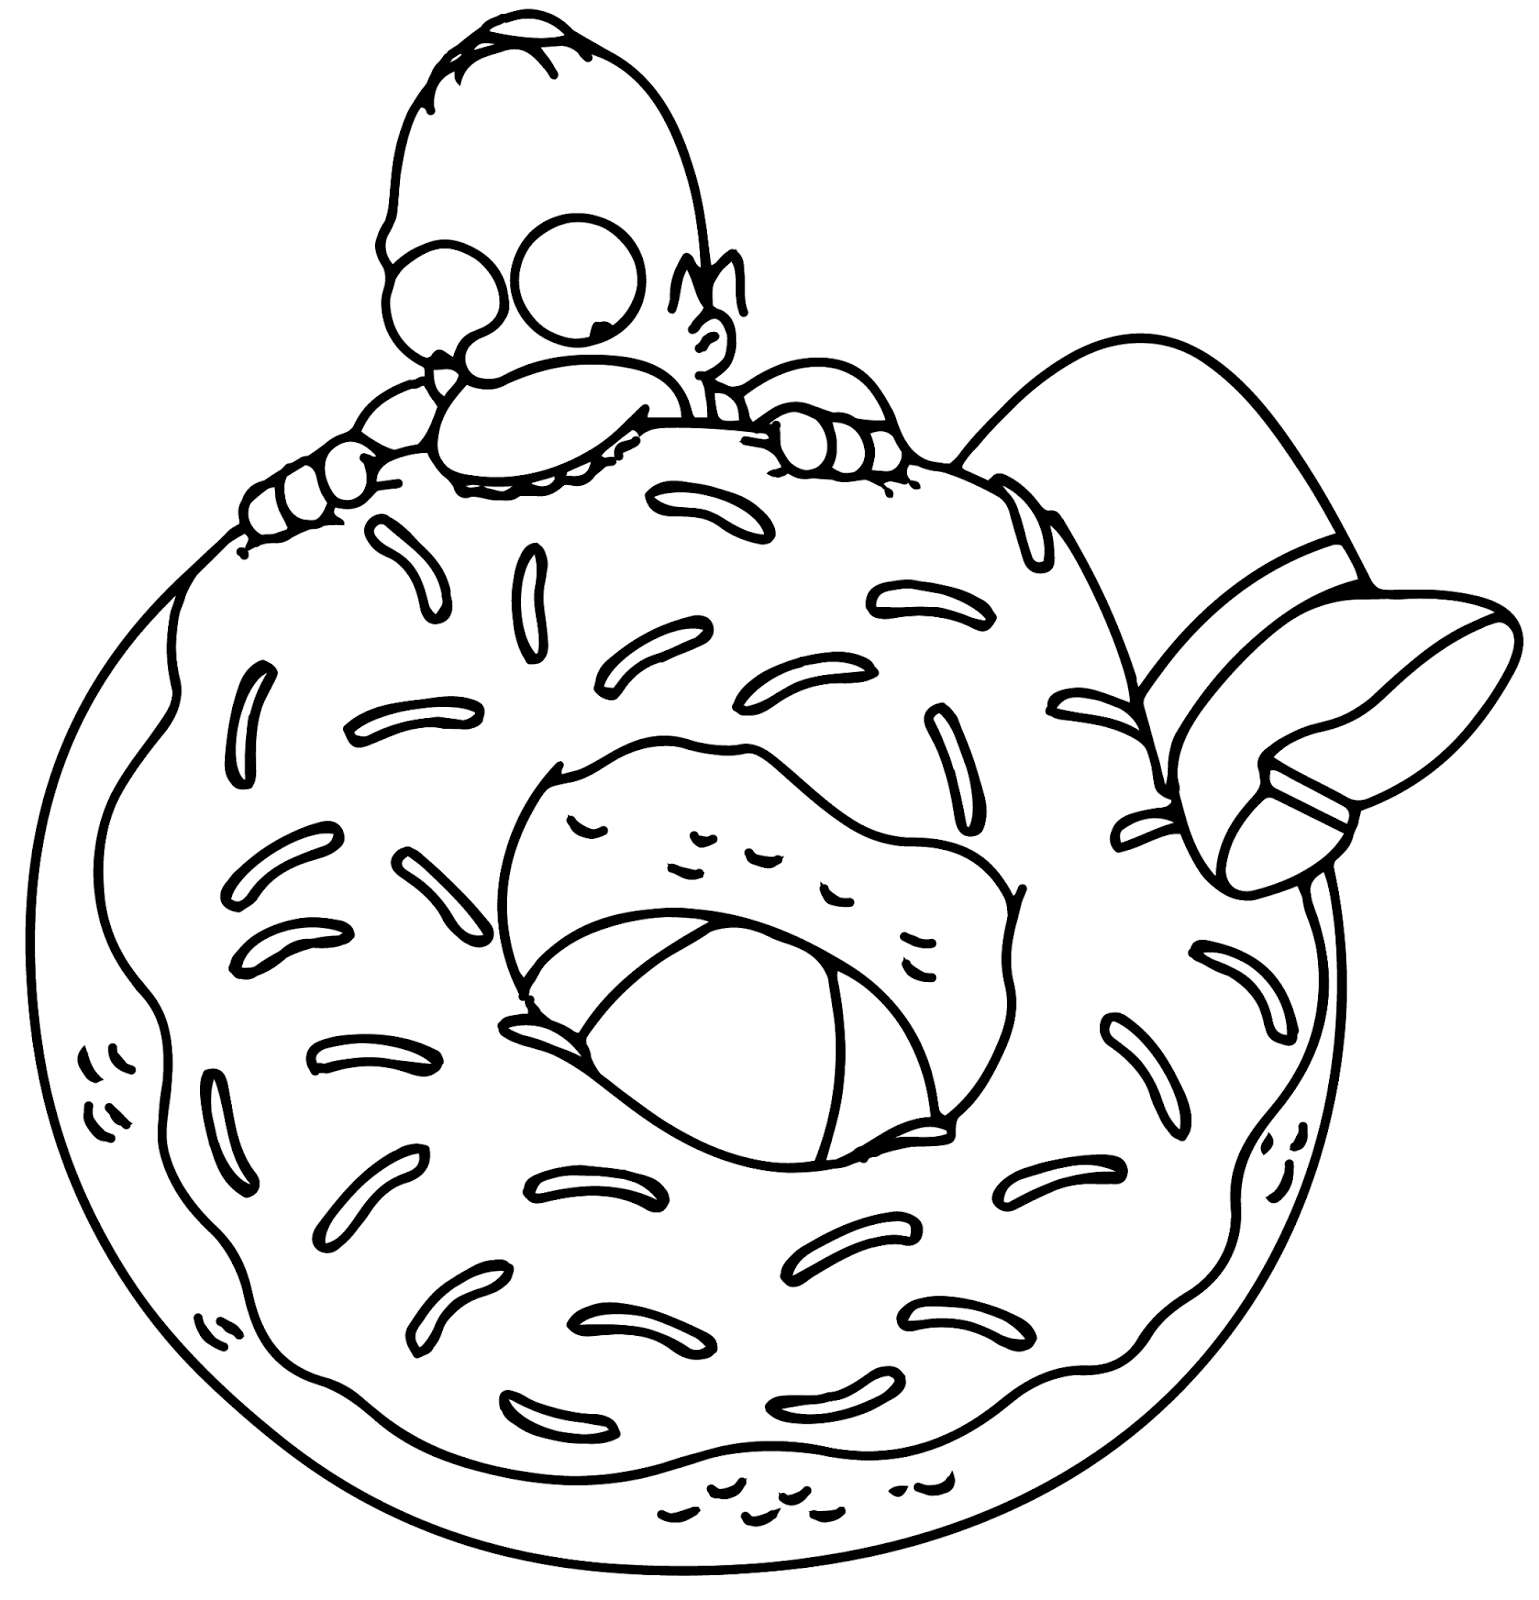 Download Donut Coloring Pages - Best Coloring Pages For Kids